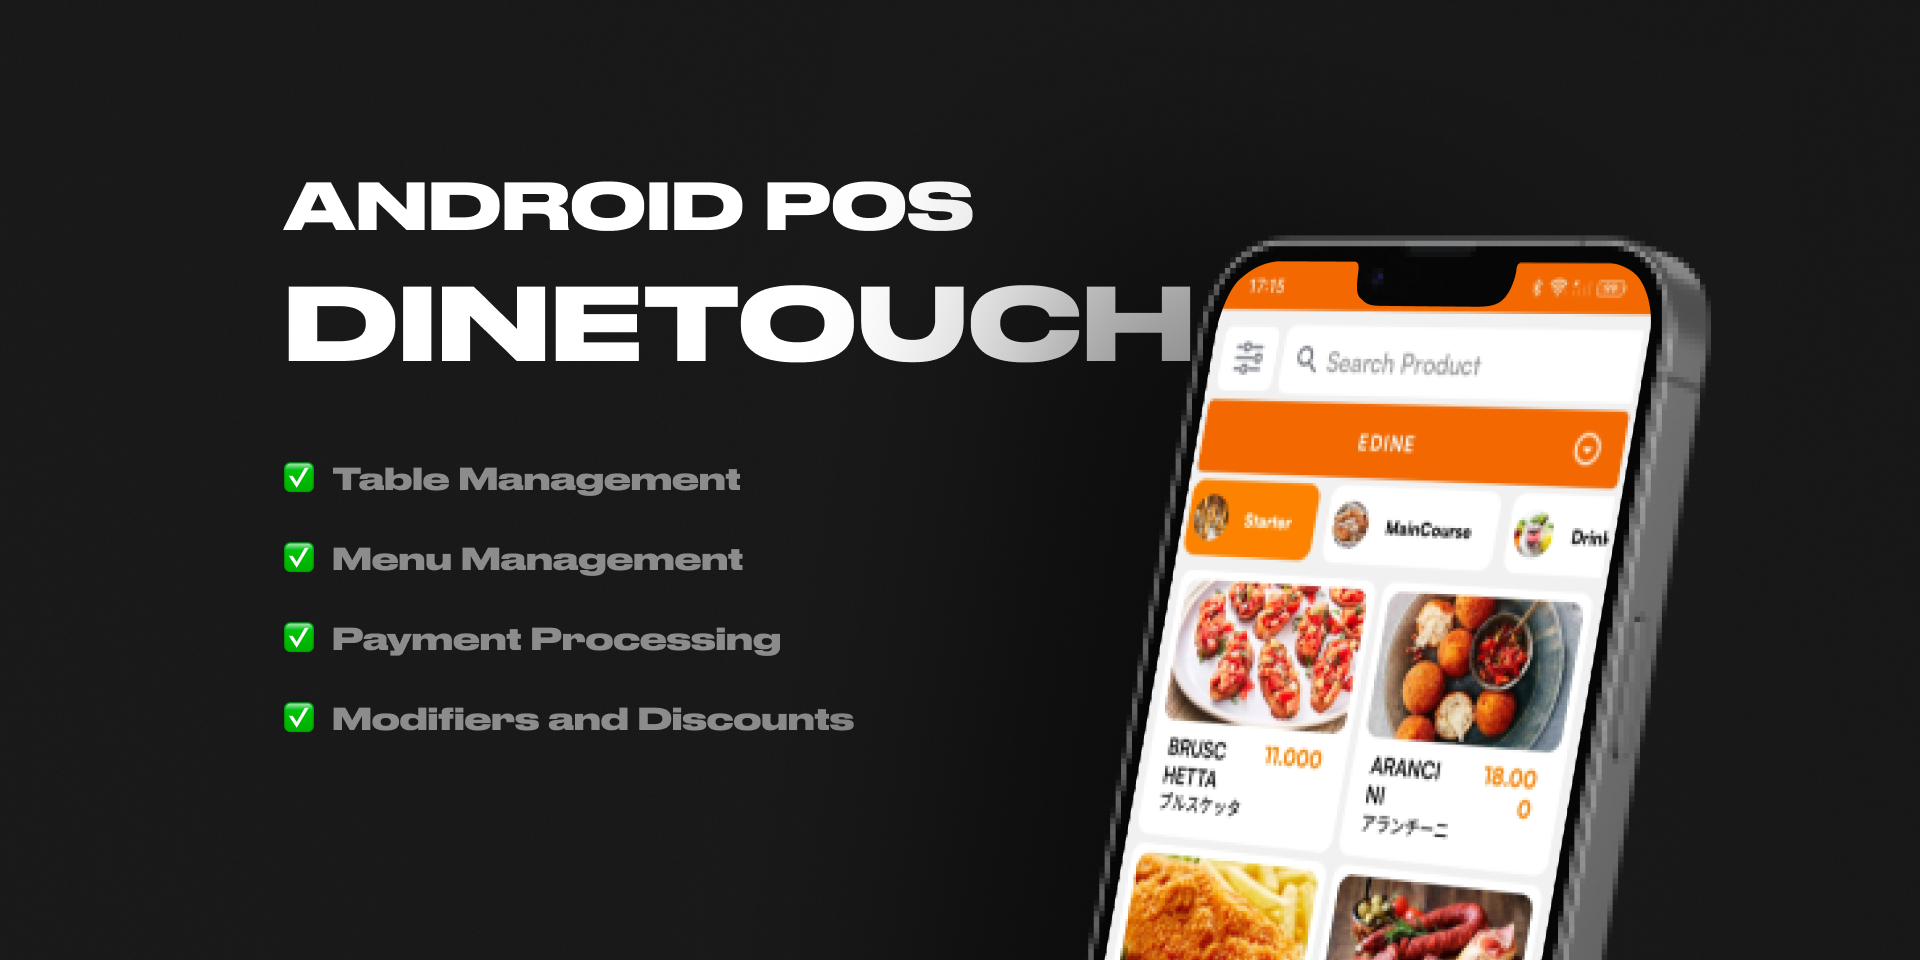 DineTouch Android POS system is a versatile restaurant management solution designed for Android devices streamlines order processing, manage operations and deliver exceptional dining experiences.